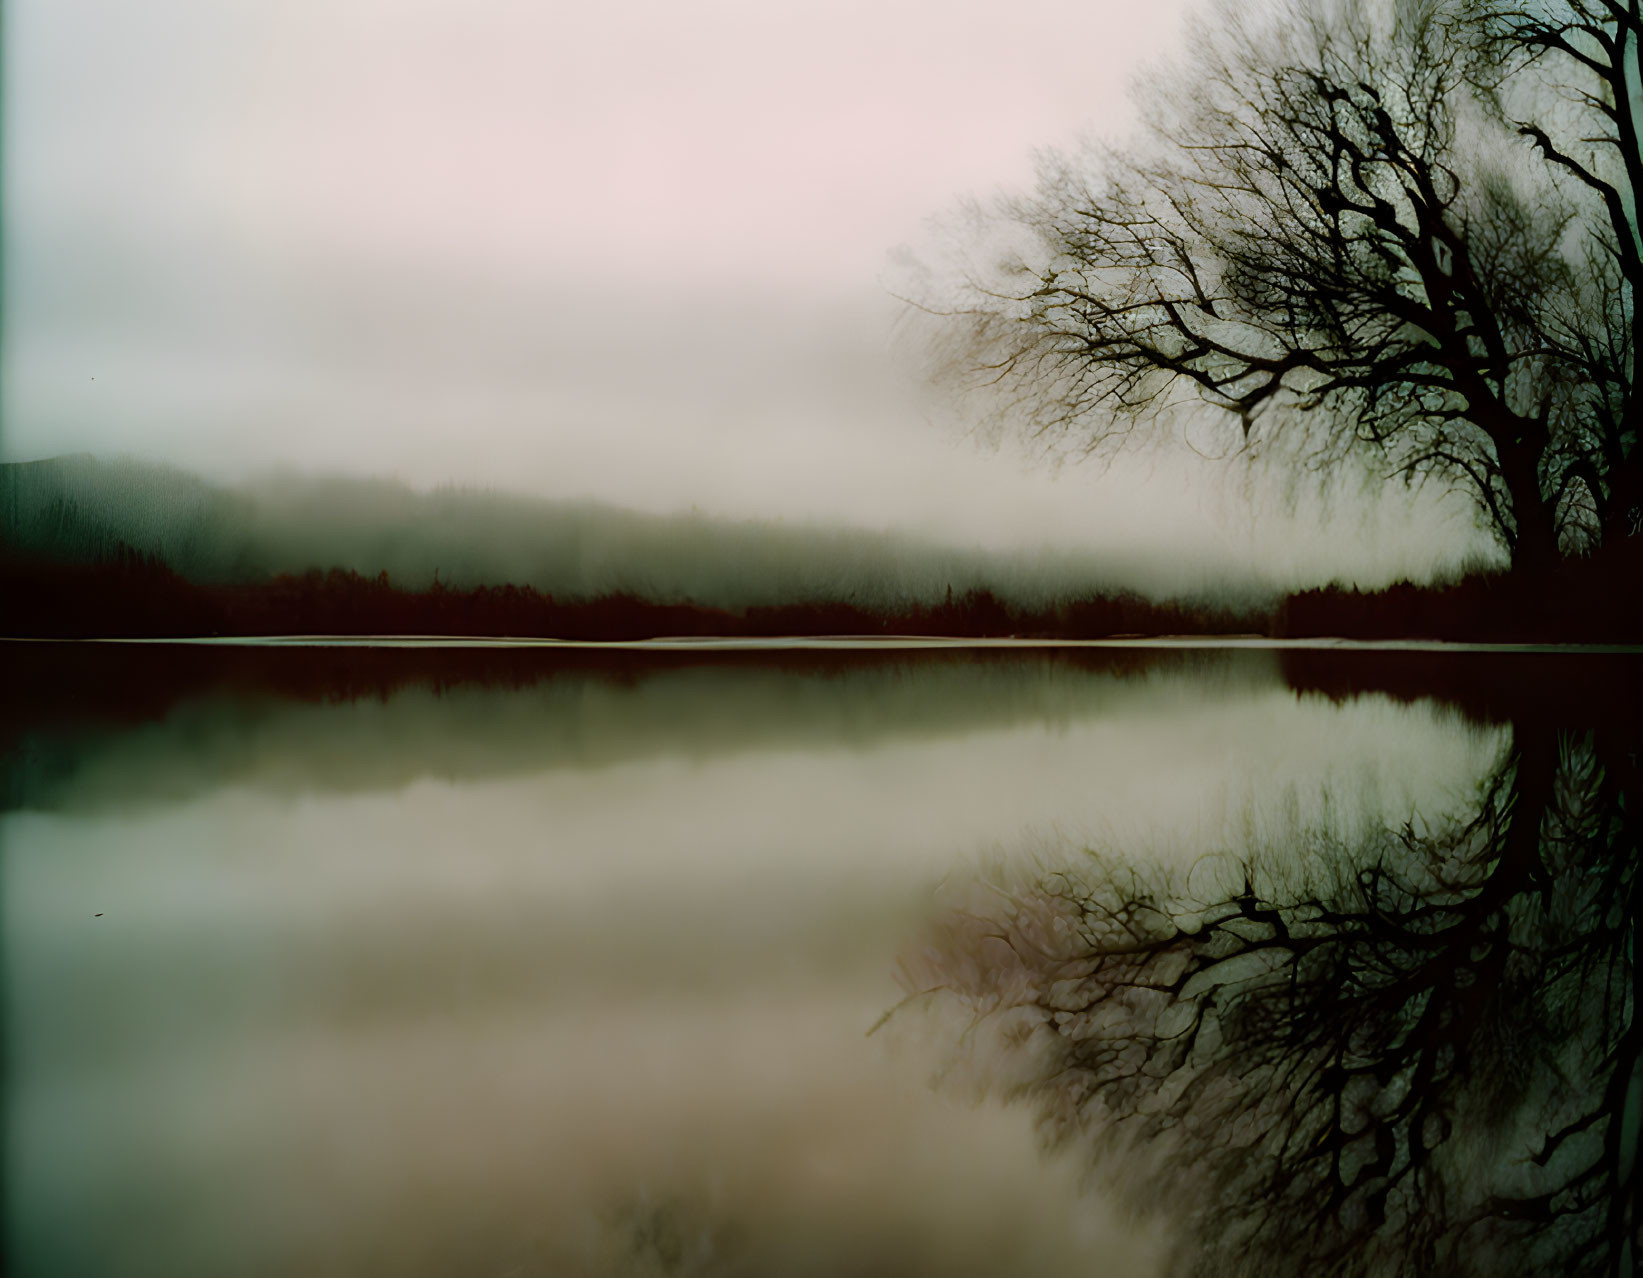 Tranquil landscape: misty lake mirrors lone tree, soft pink and green sky